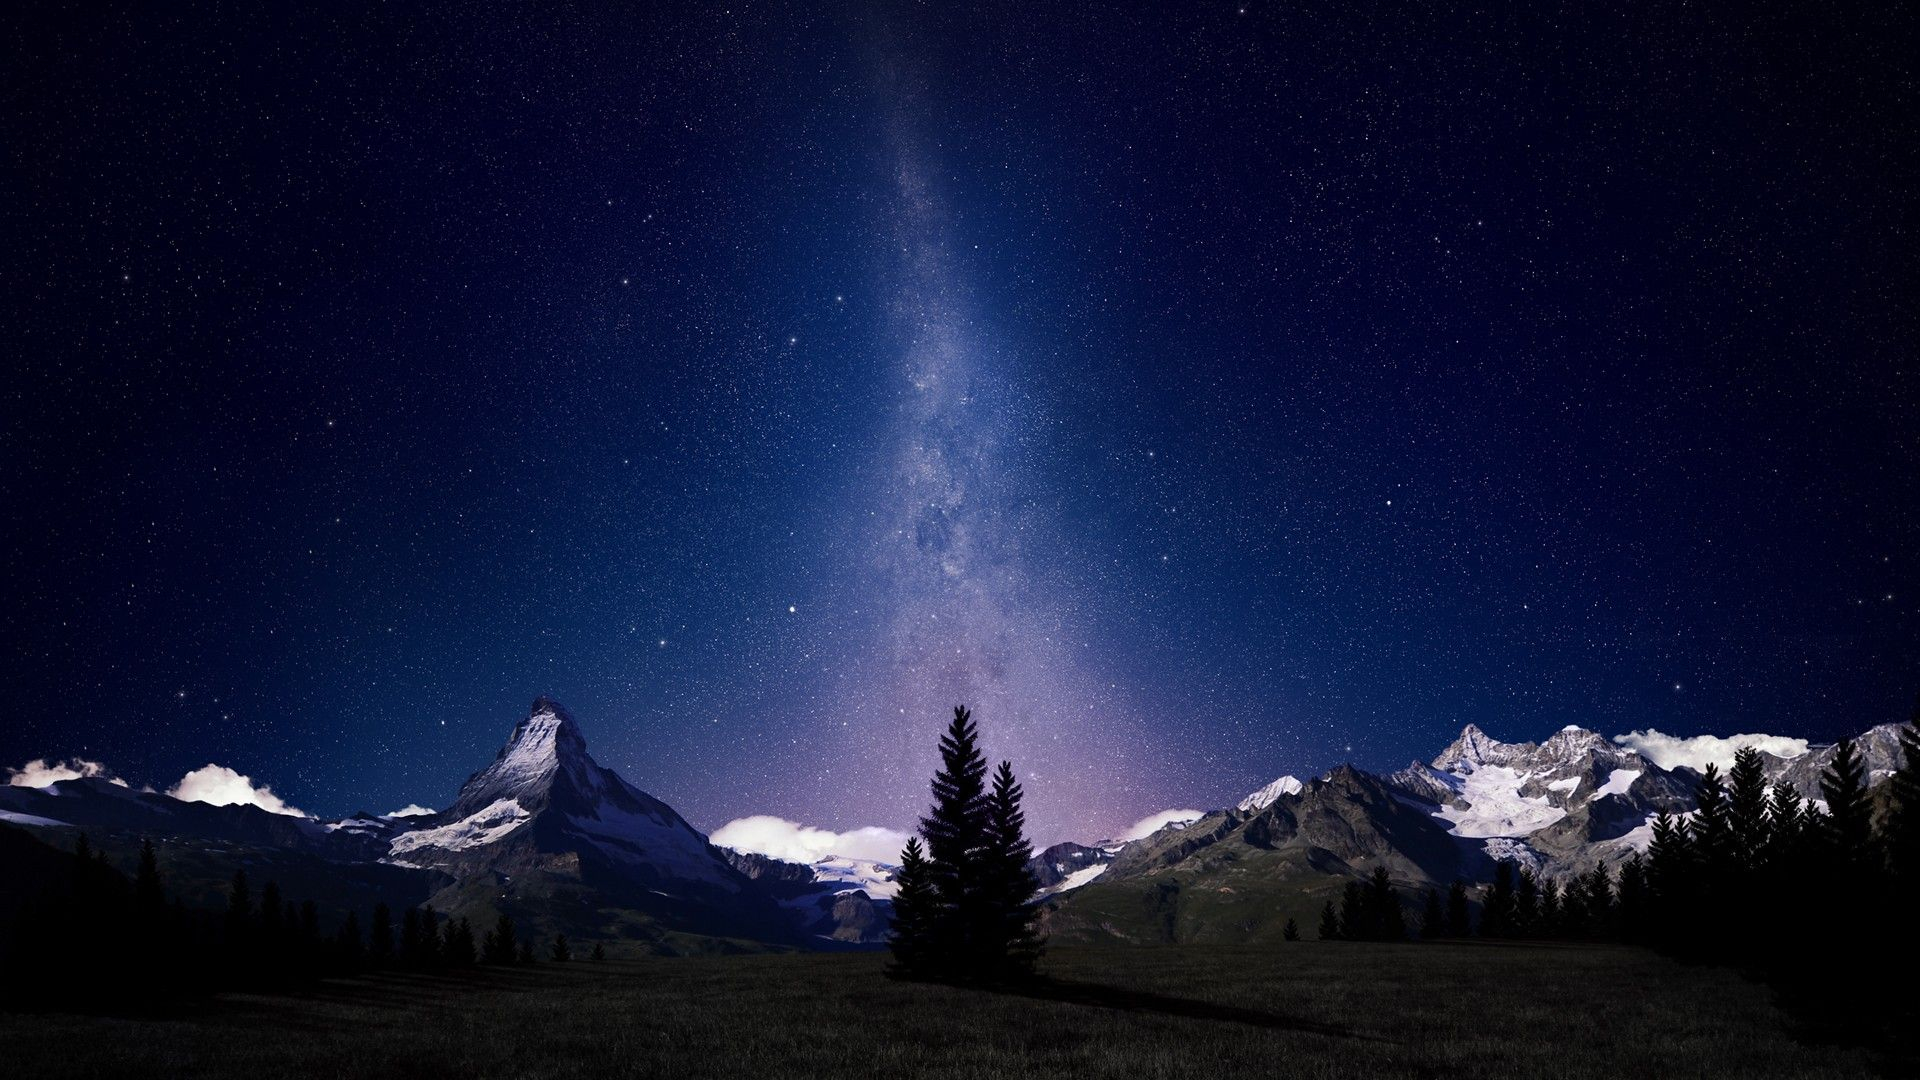 1920x1080 Space Wallpapers Collection (mostly ) | Night sky wallpaper, Beautiful night sky, Starry night background